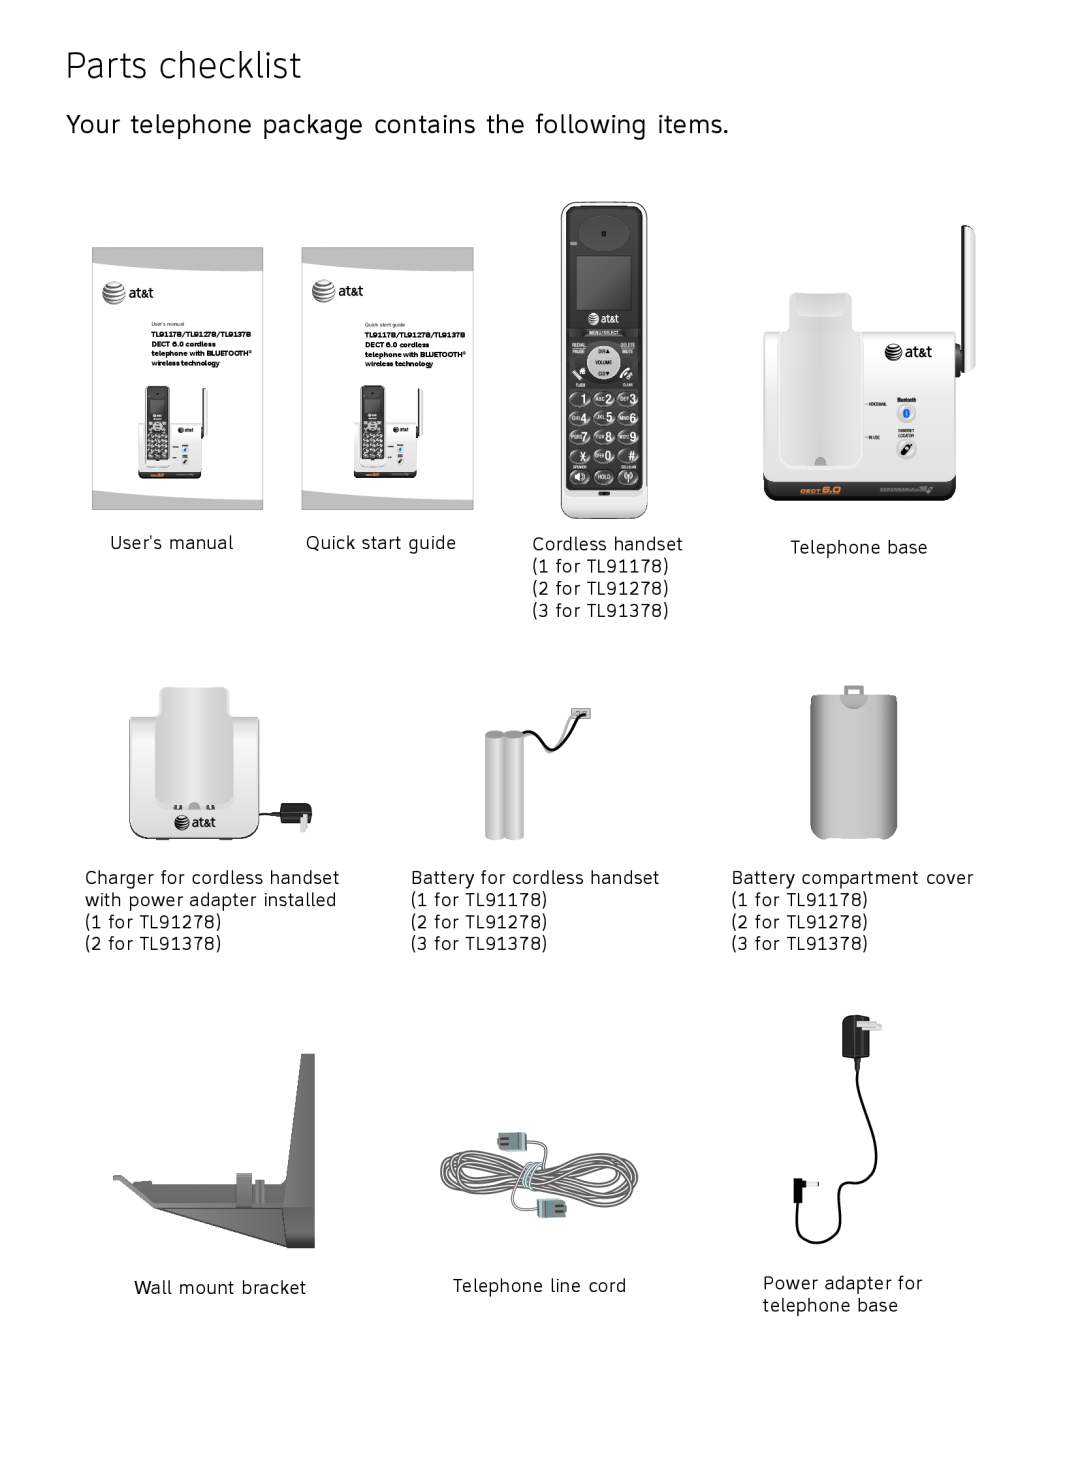 AT&T TL91278, TL9178, TL91378, TL91178 user manual Parts checklist, Your telephone package contains the following items 